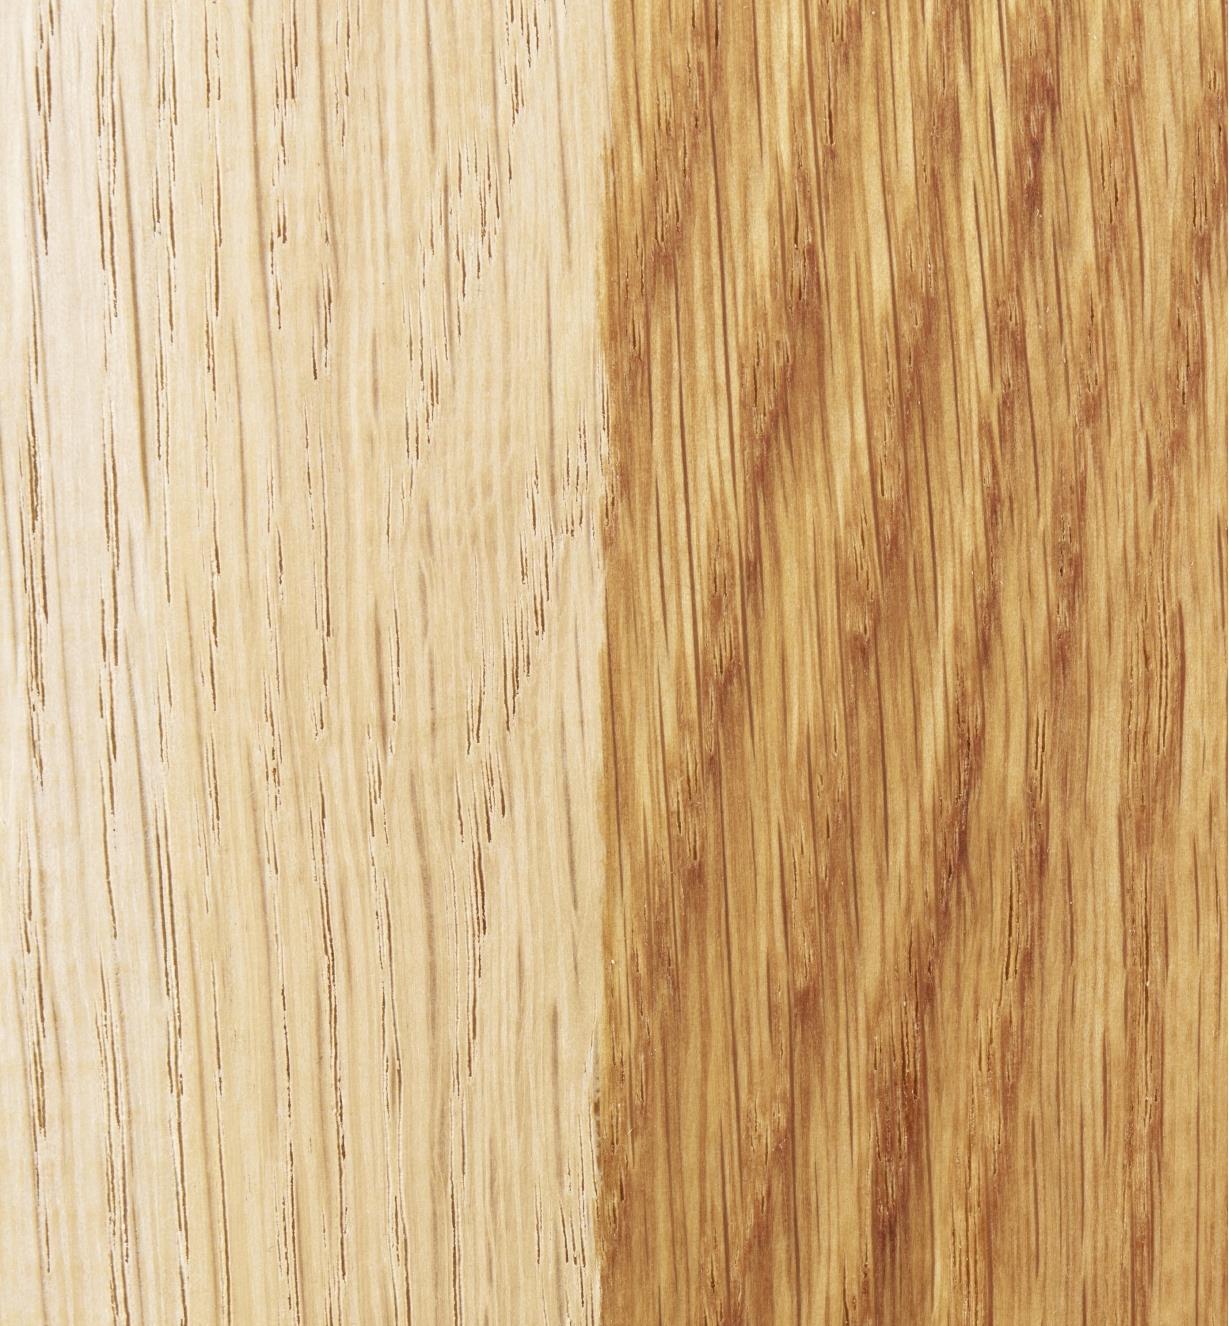 On the left is untreated wood, and on the right is wood treated with Odie’s Dark Oil